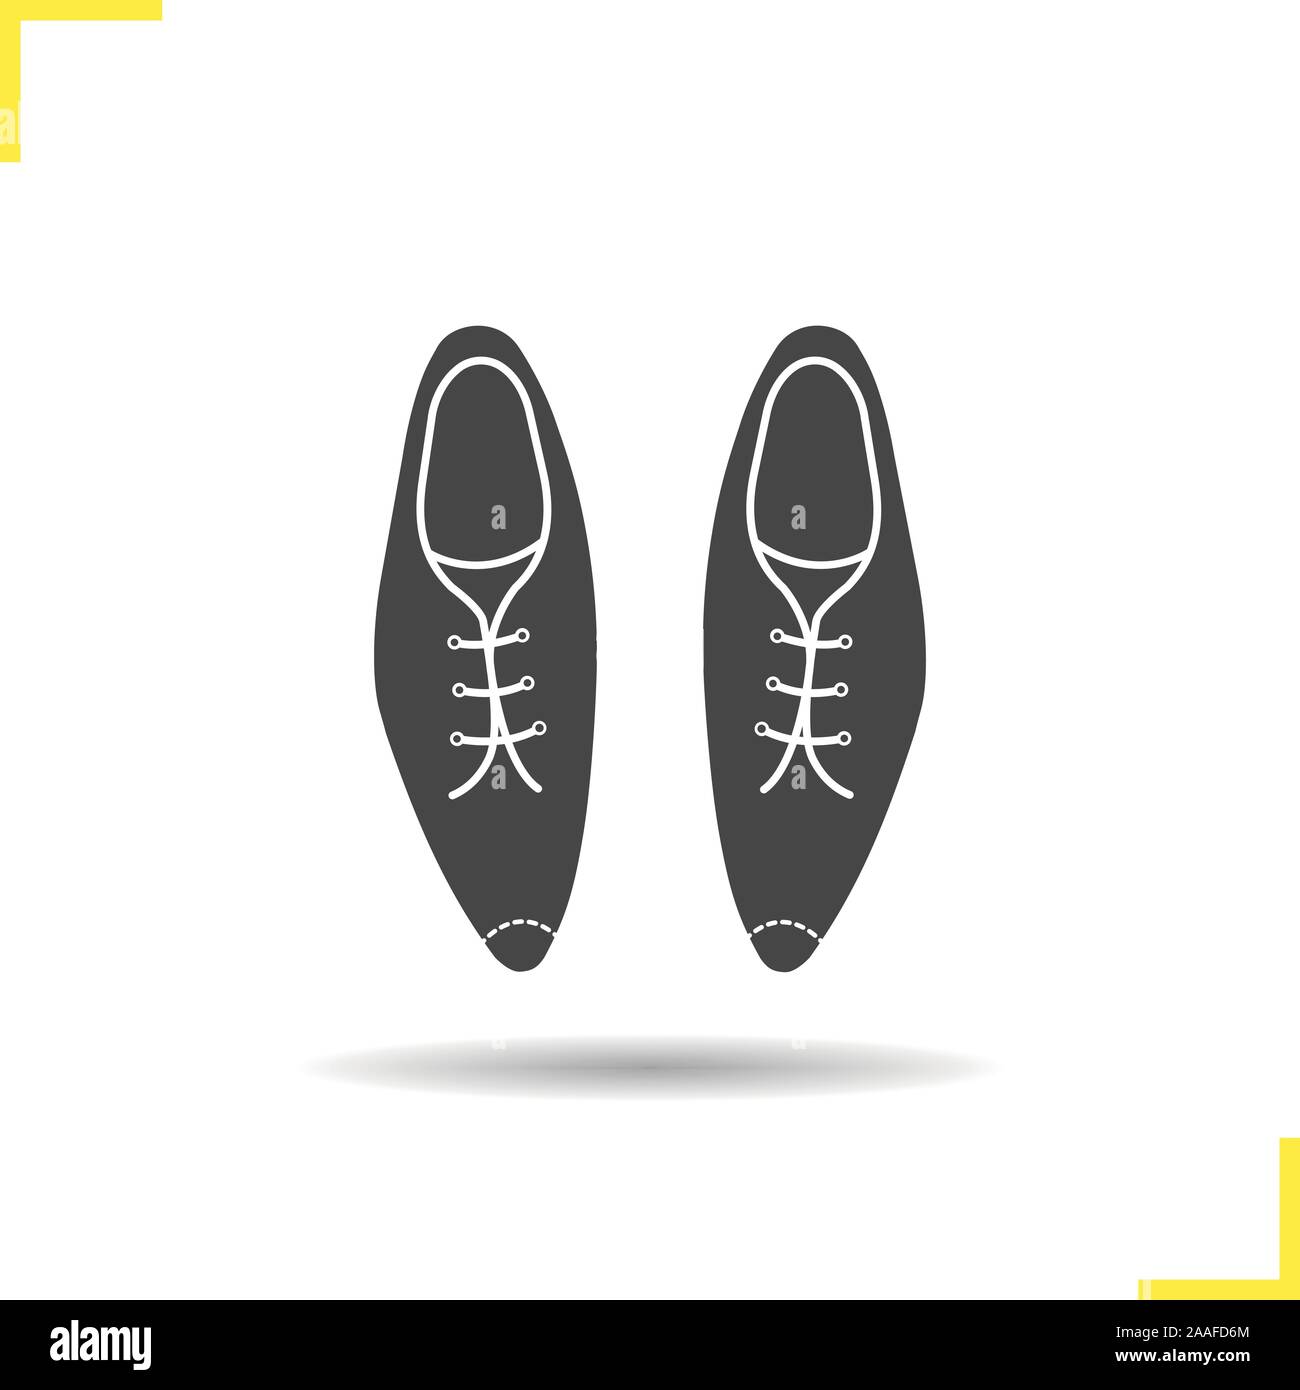 Men's shoes icon. Drop shadow leather shoes silhouette symbol.  Male classical footwear with shoelaces. Men's shoes logo concept. Vector varnished lea Stock Vector